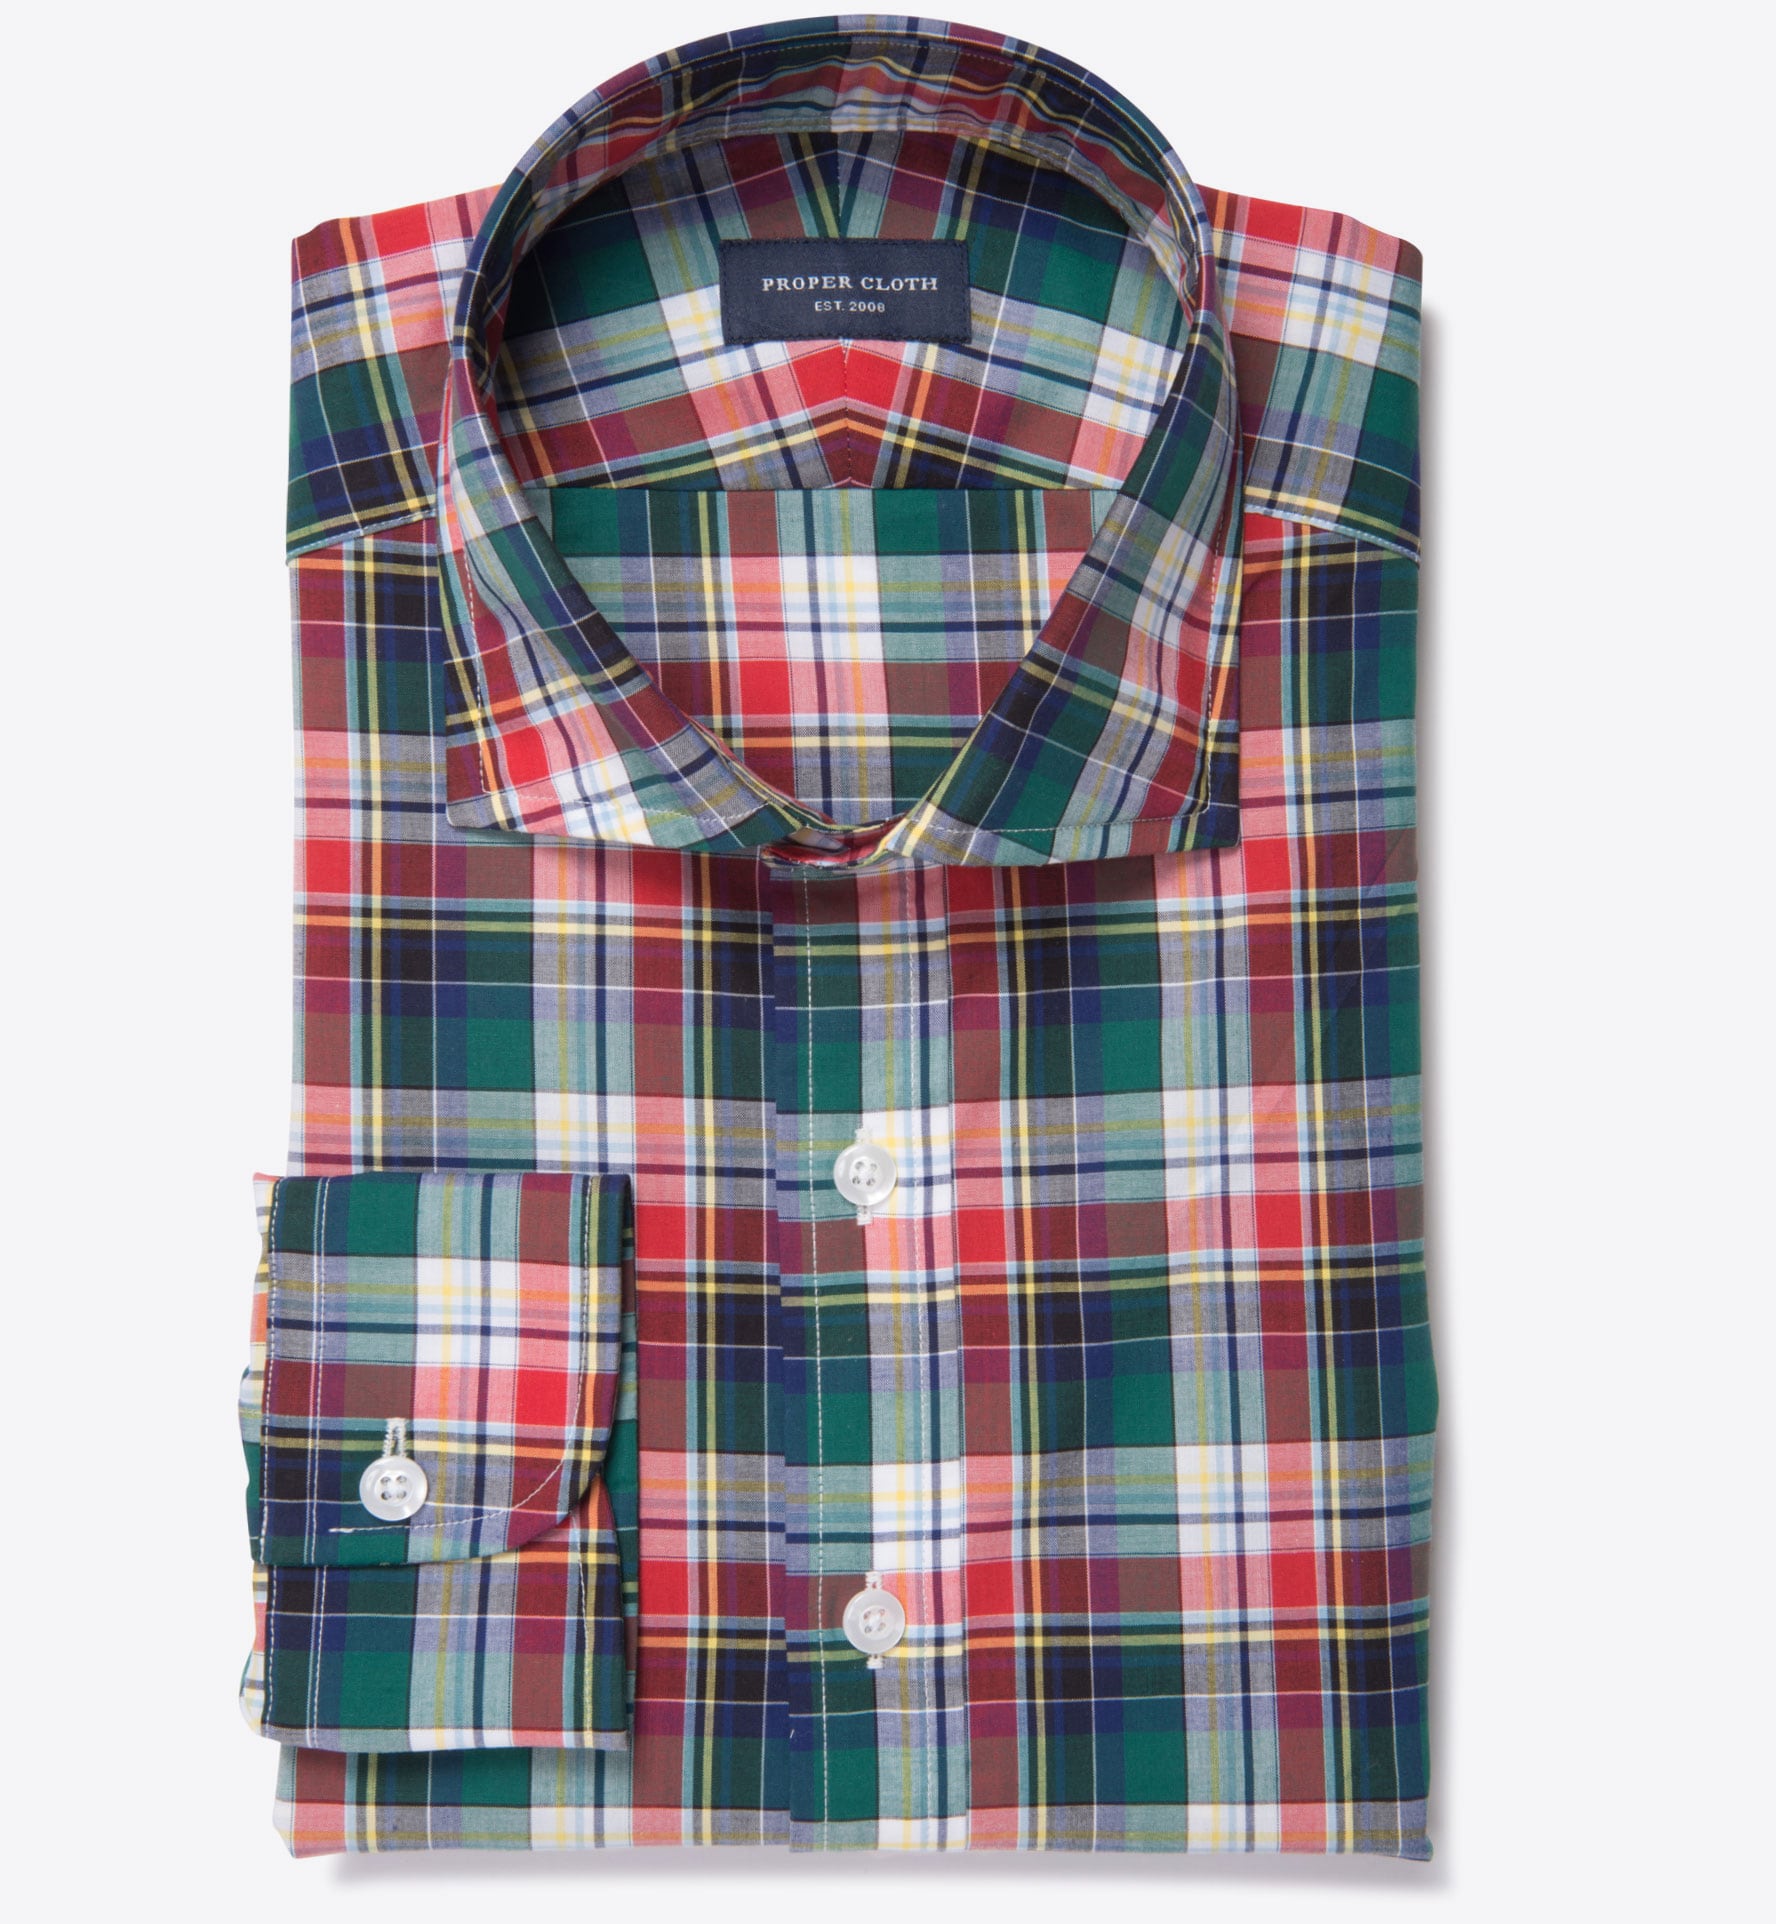 Wythe Multi Color Plaid Tailor Made Shirt by Proper Cloth